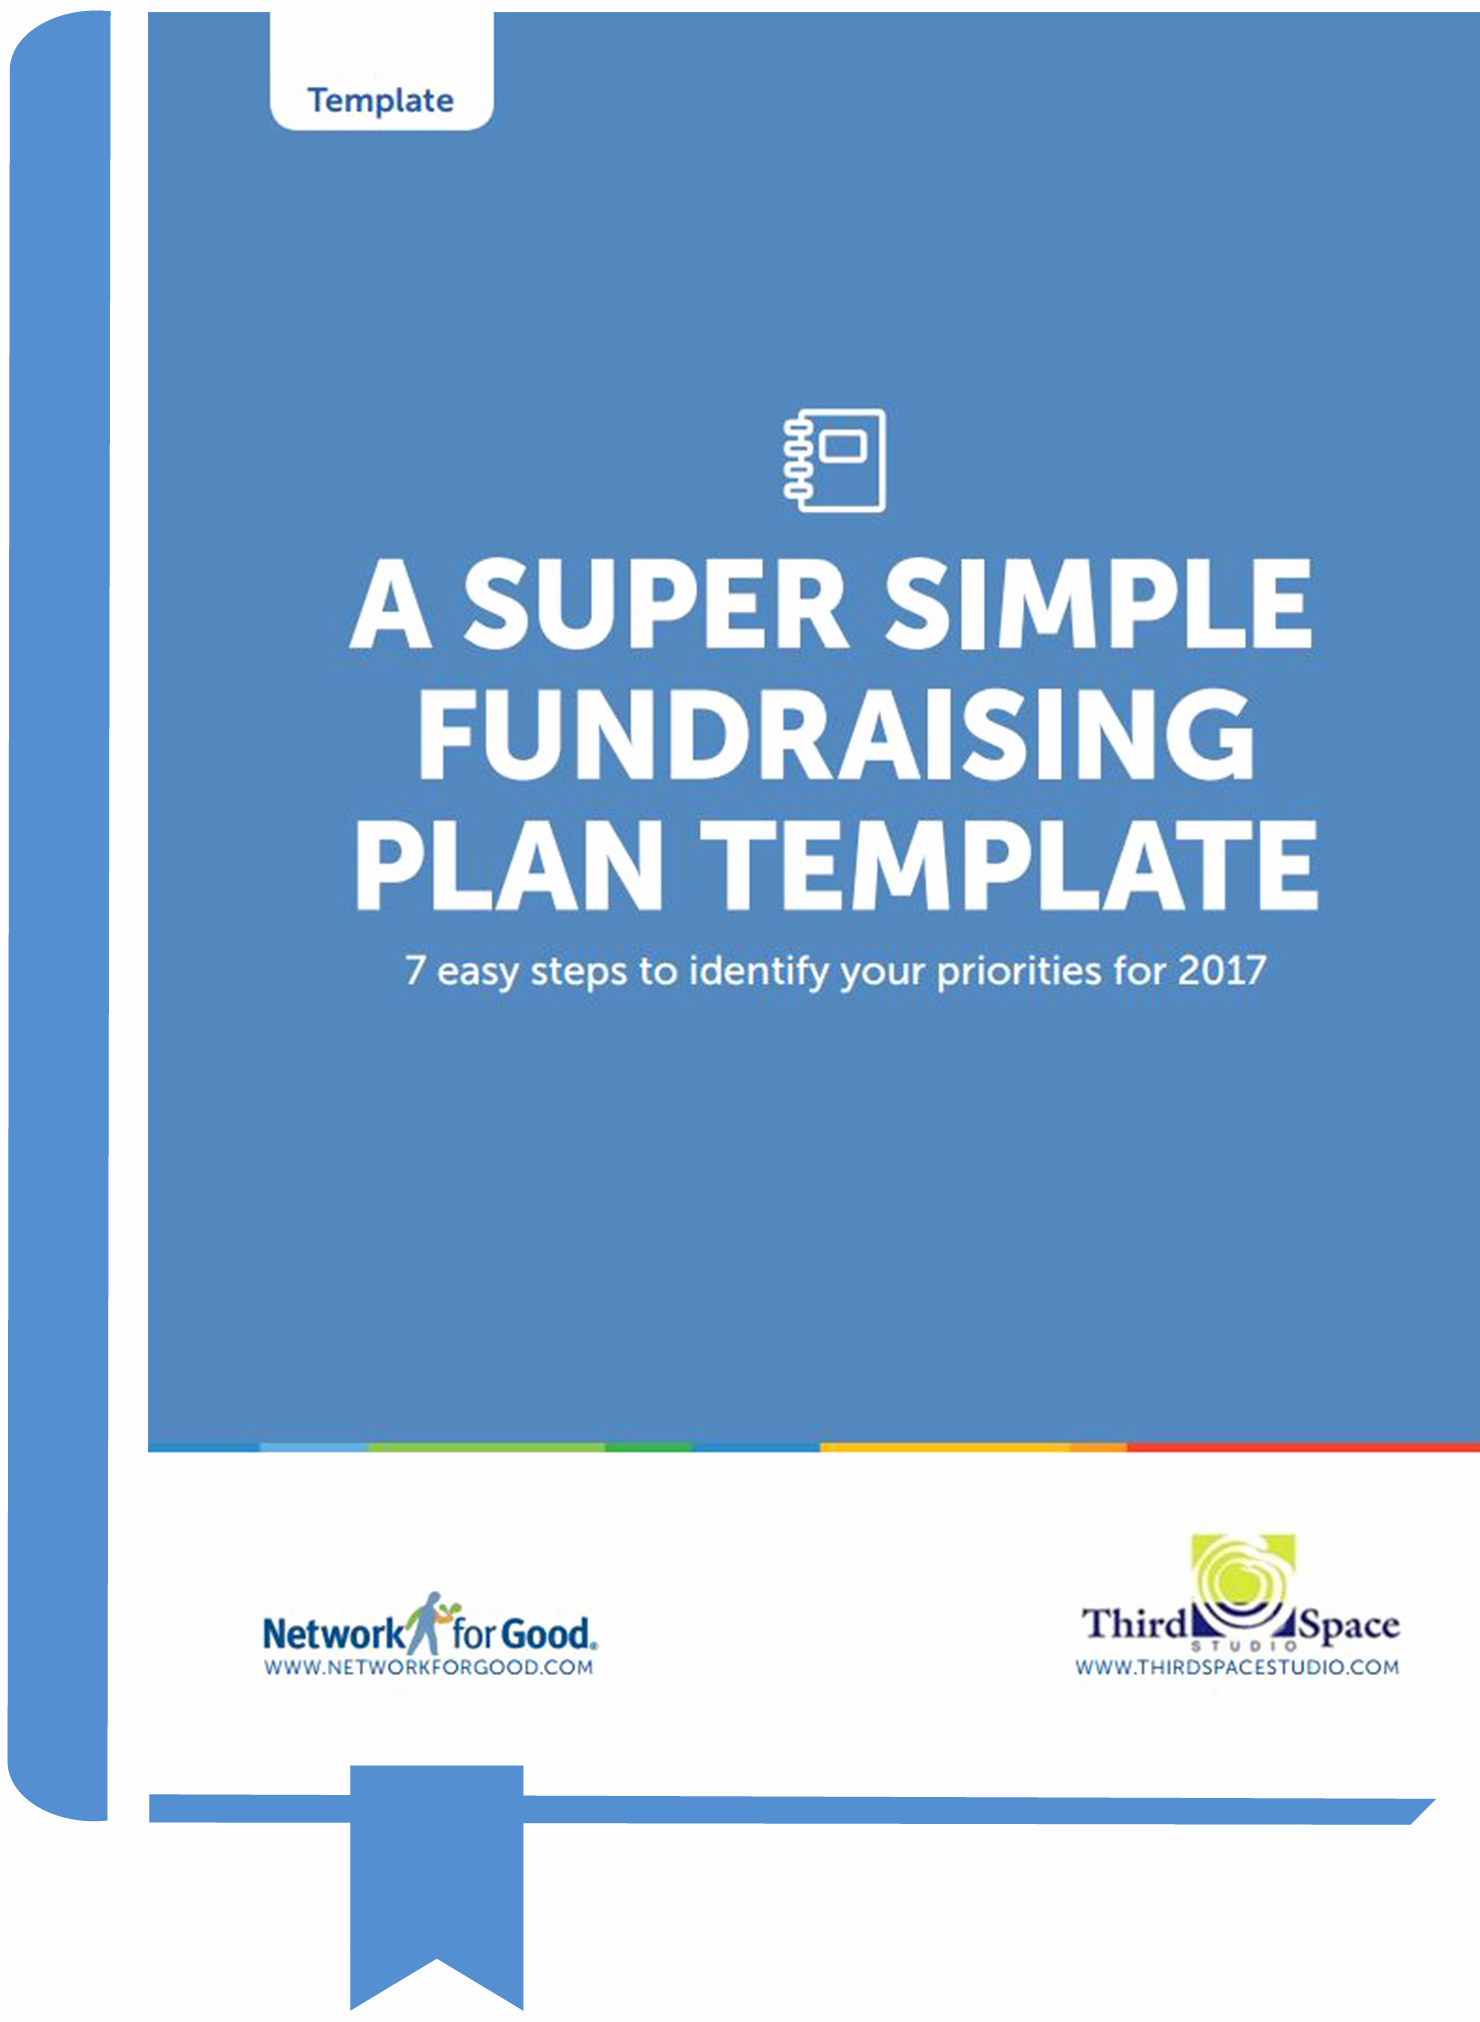 Non Profit Marketing Plan Template Inspirational the Super Simple Fundraising Plan for Nonprofits